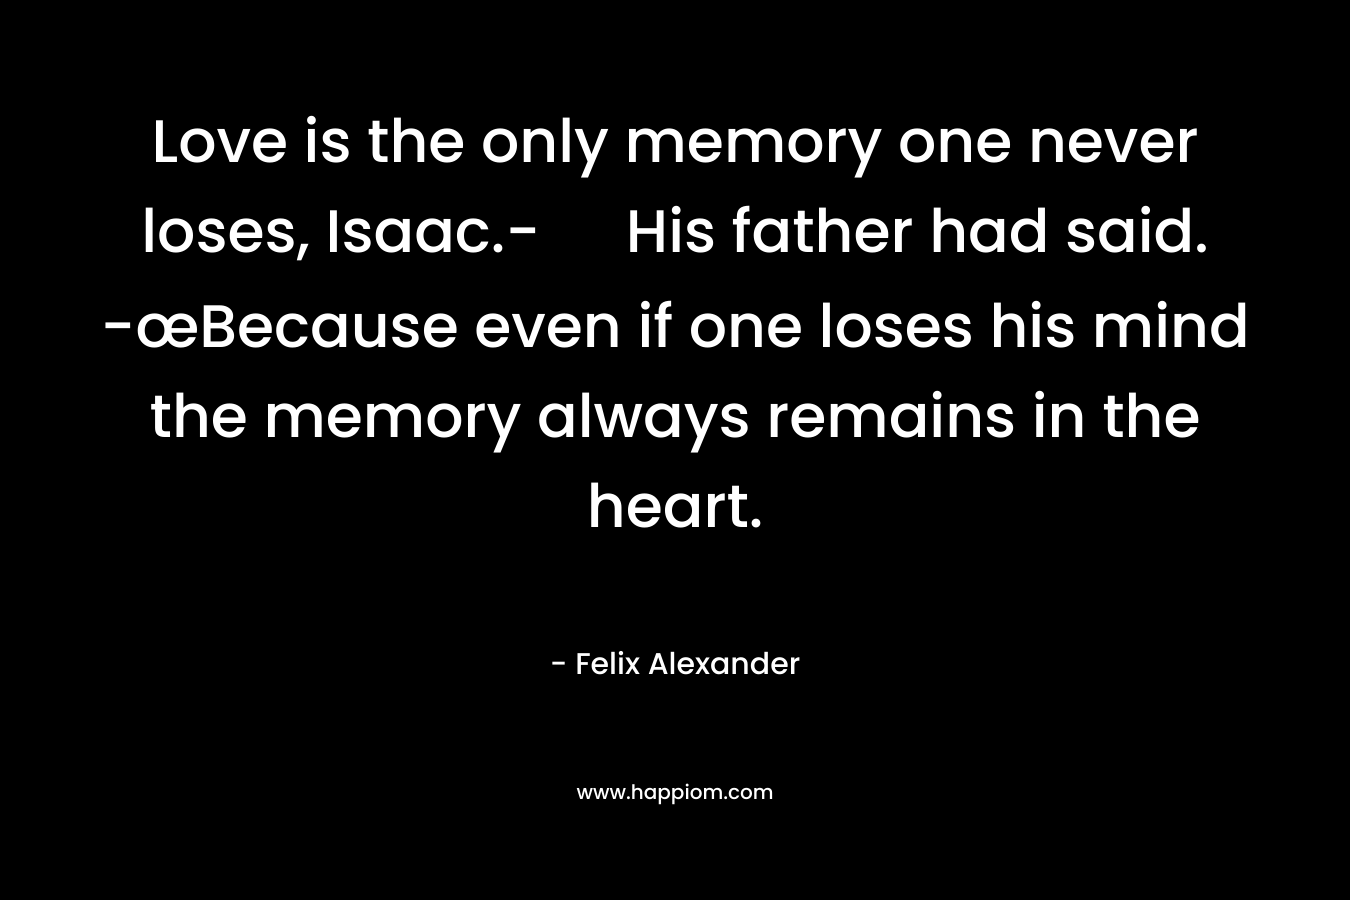 Love is the only memory one never loses, Isaac.- His father had said. -œBecause even if one loses his mind the memory always remains in the heart.